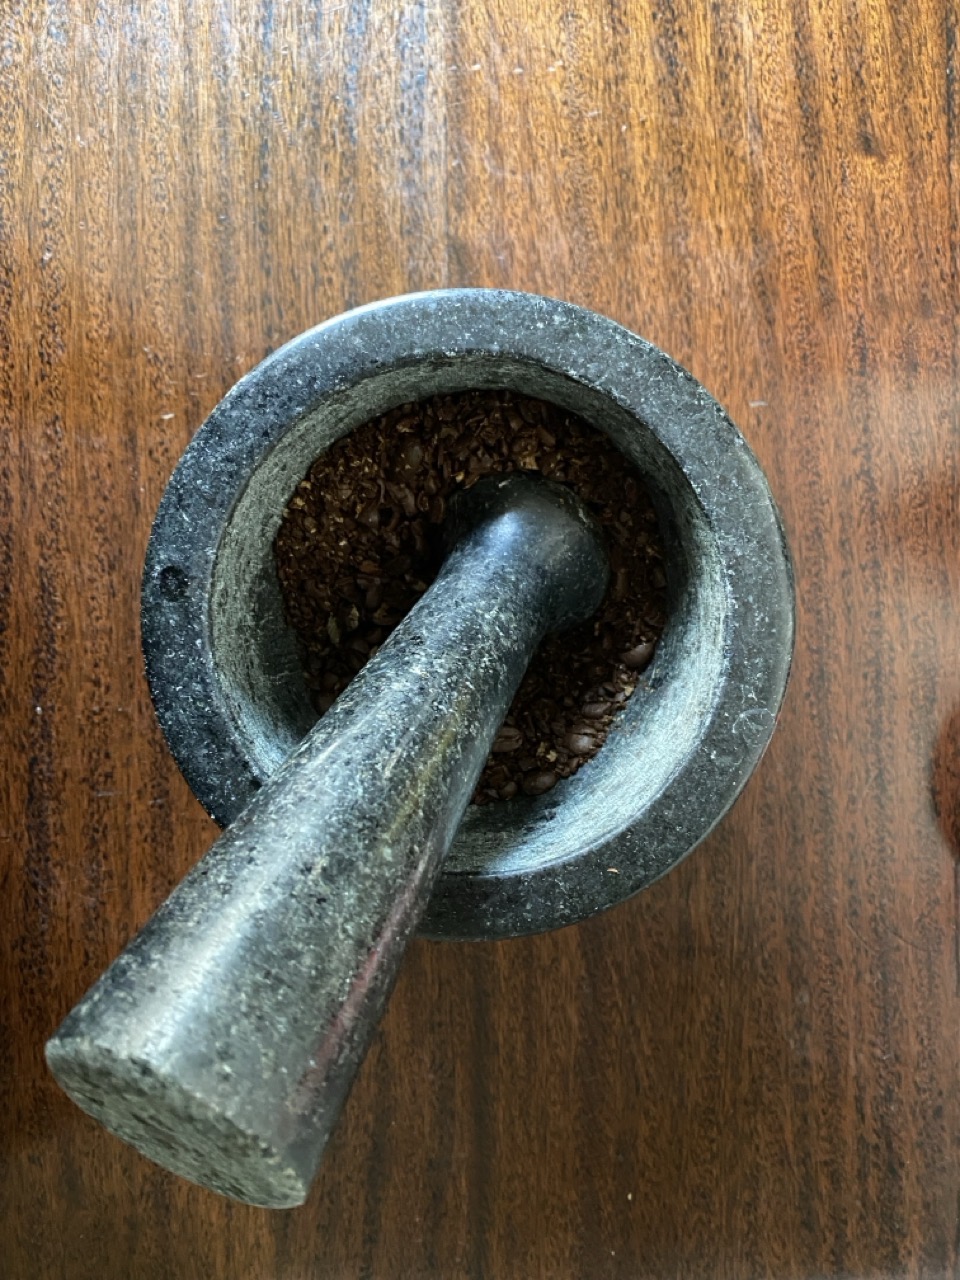 A pestle and mortar with coffee beans. You want a pretty coarse grind for cold brew or it can get overextracted (bitter).